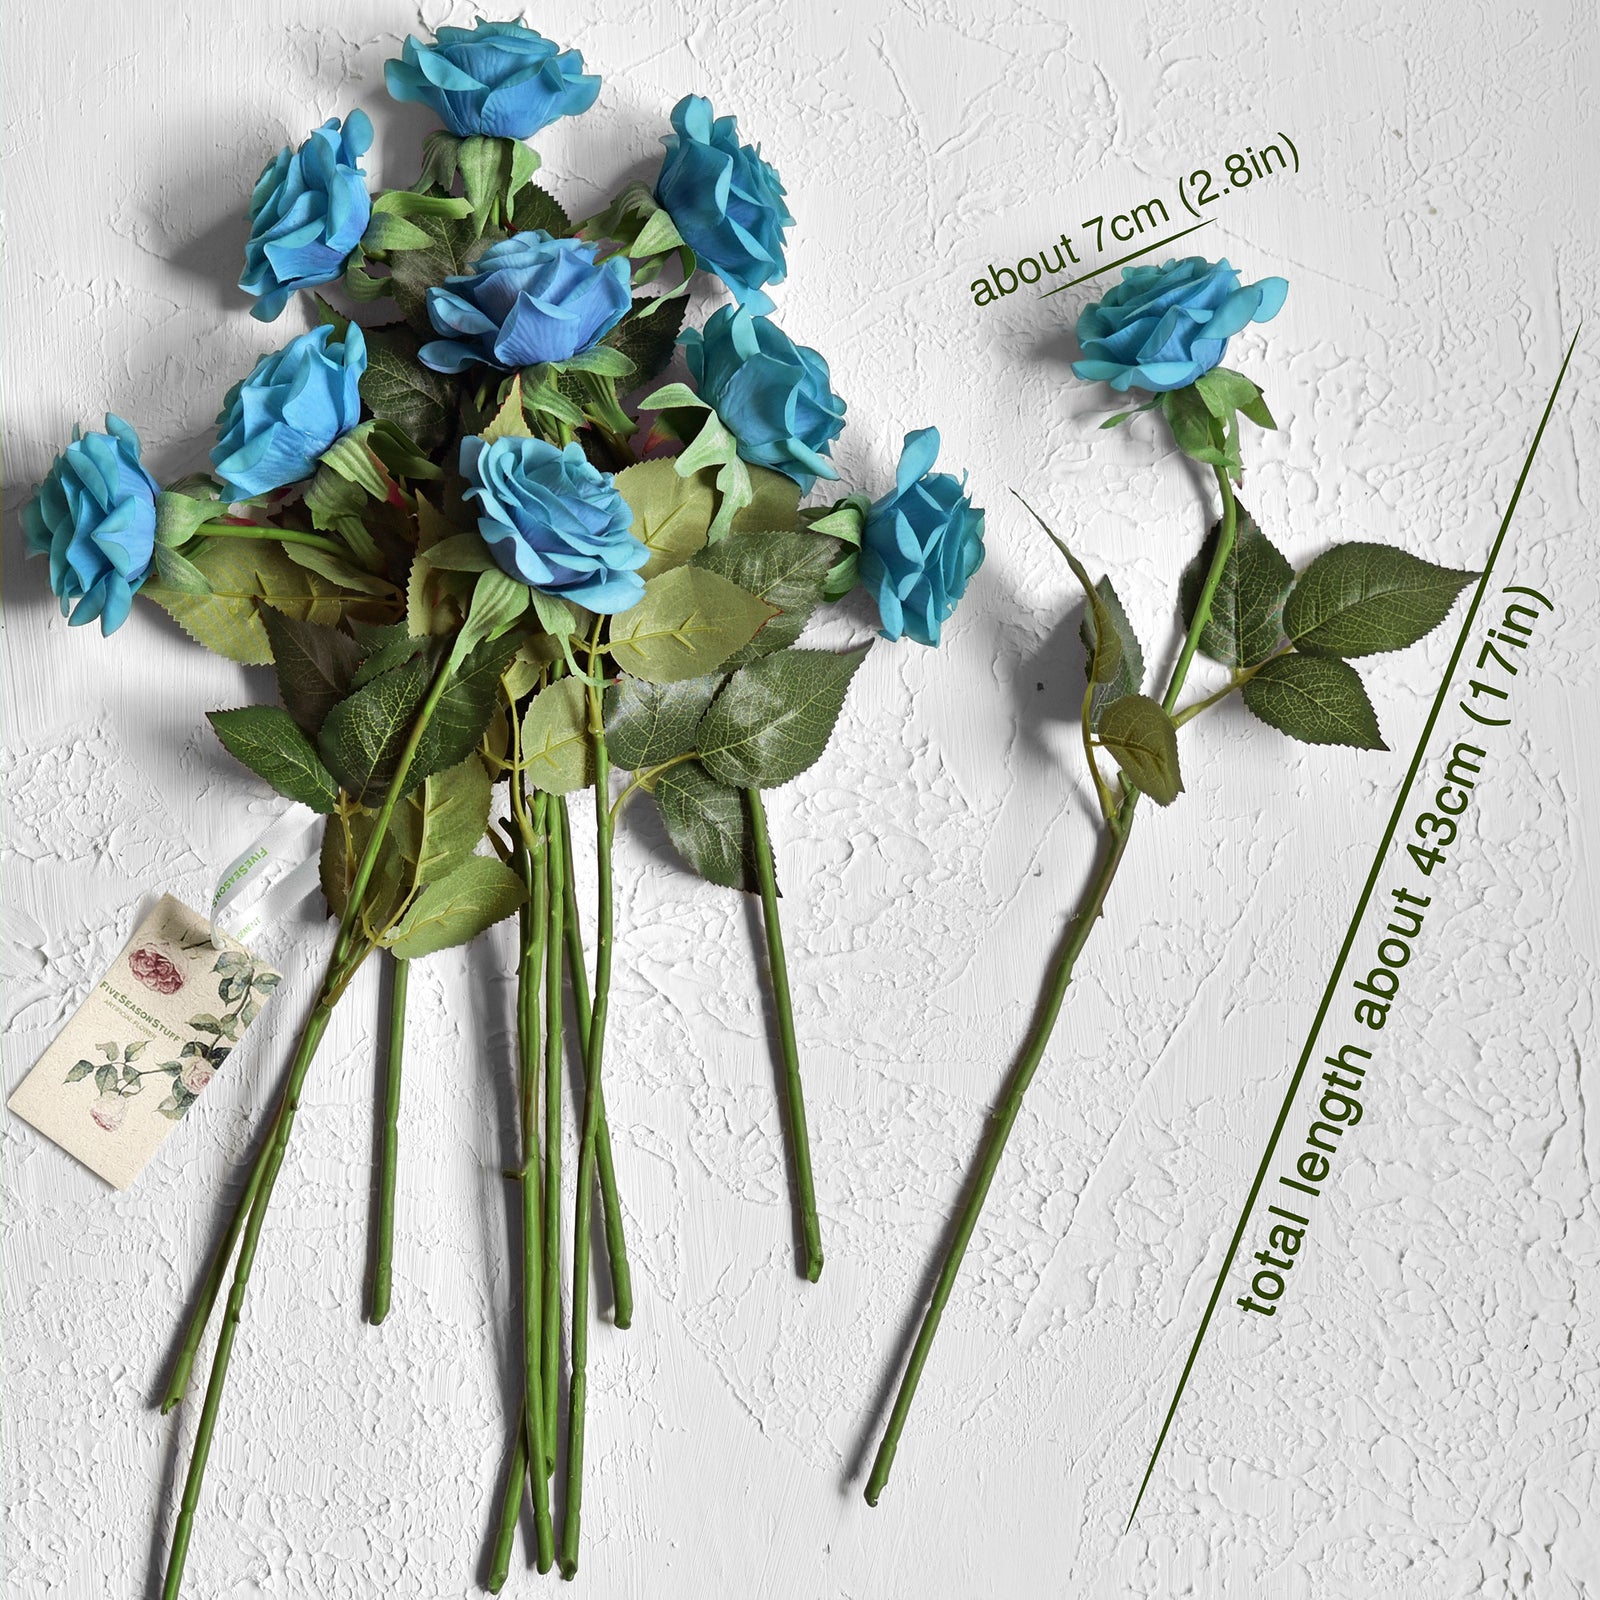 Real Touch 10 Stems Teal Silk Artificial Roses Flowers ‘Petals Feel and Look like Fresh Roses'